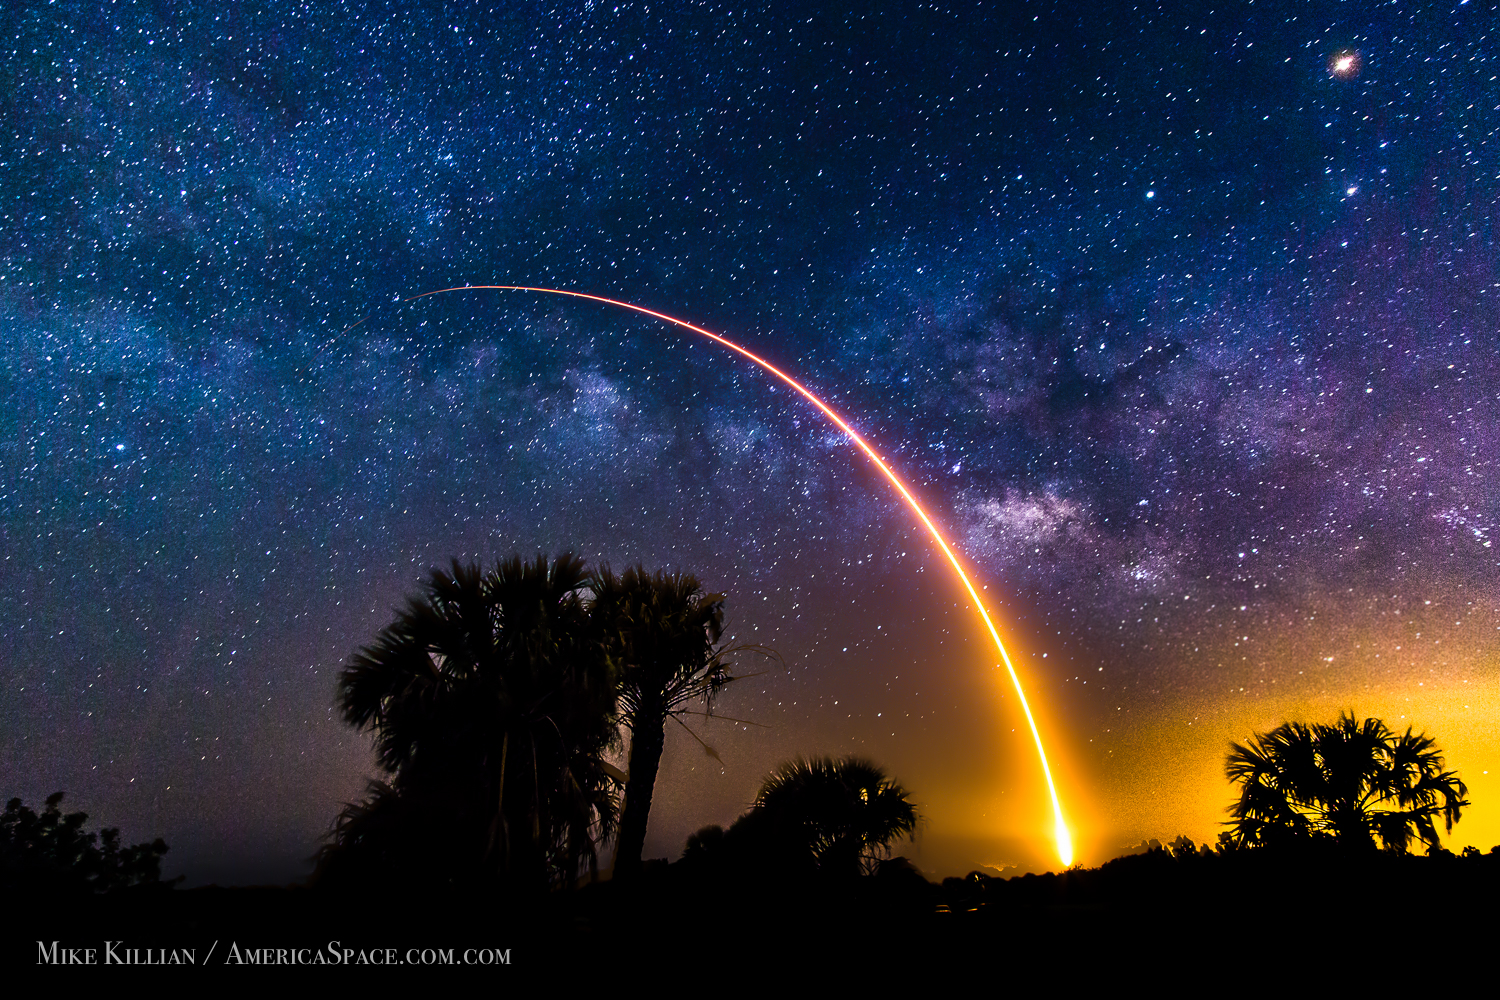 A SpaceX Falcon-9 rocket pulled off a picture-perfect launch at 1:21 a.m. EDT May 6, 2016 from Cape Canaveral, Fla SLC-40, successfully delivering the JCSAT-14 satellite to GTO. Photo Credit: Mike Killian / AmericaSpace